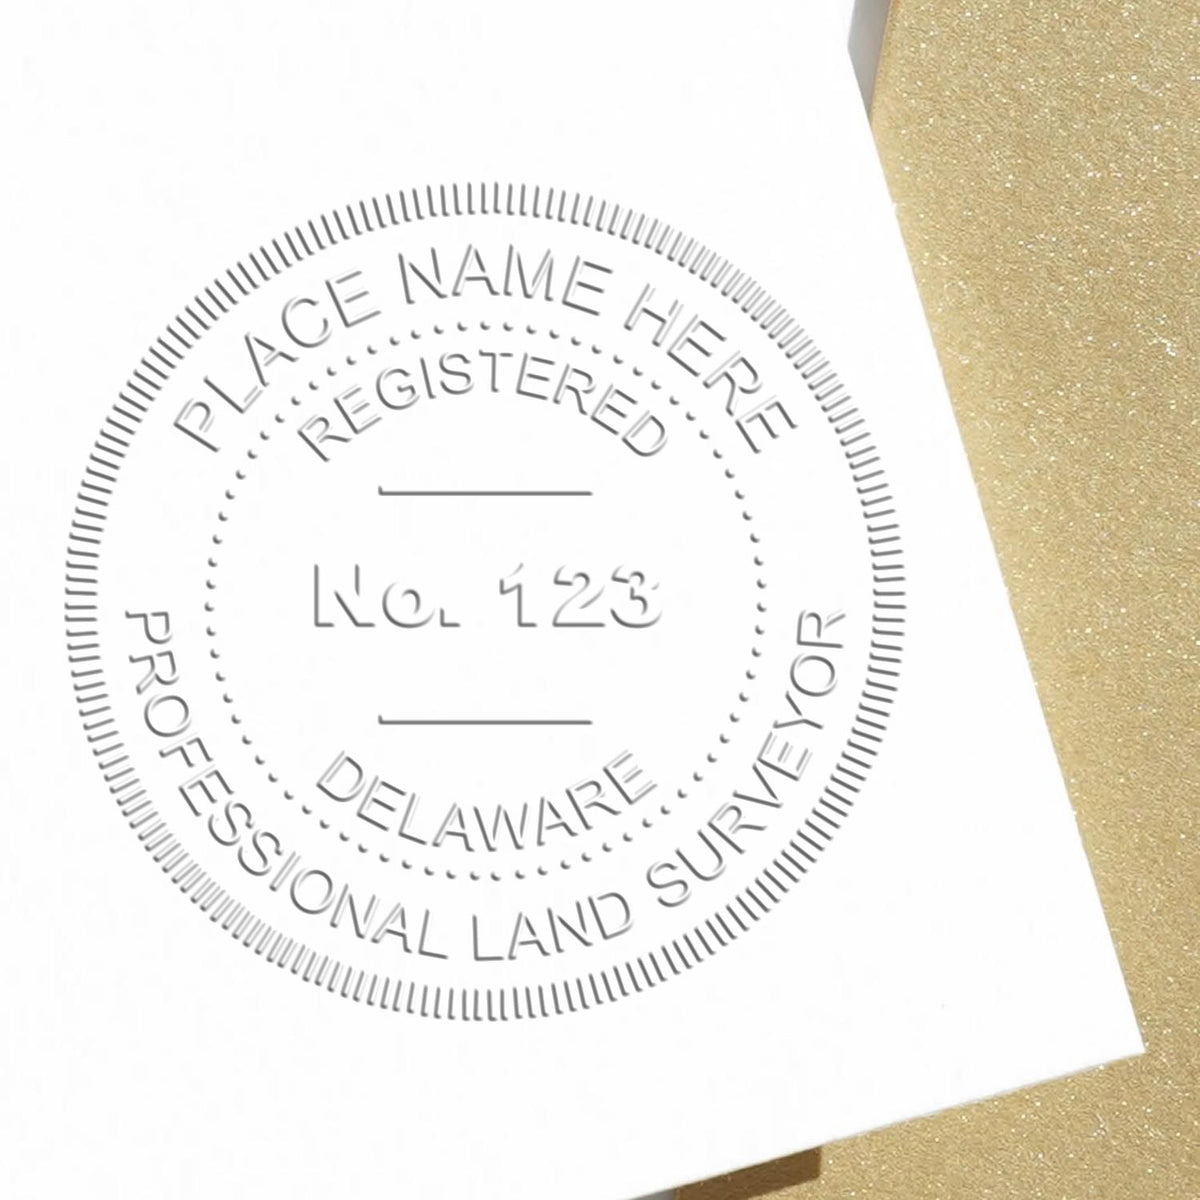 An alternative view of the Heavy Duty Cast Iron Delaware Land Surveyor Seal Embosser stamped on a sheet of paper showing the image in use